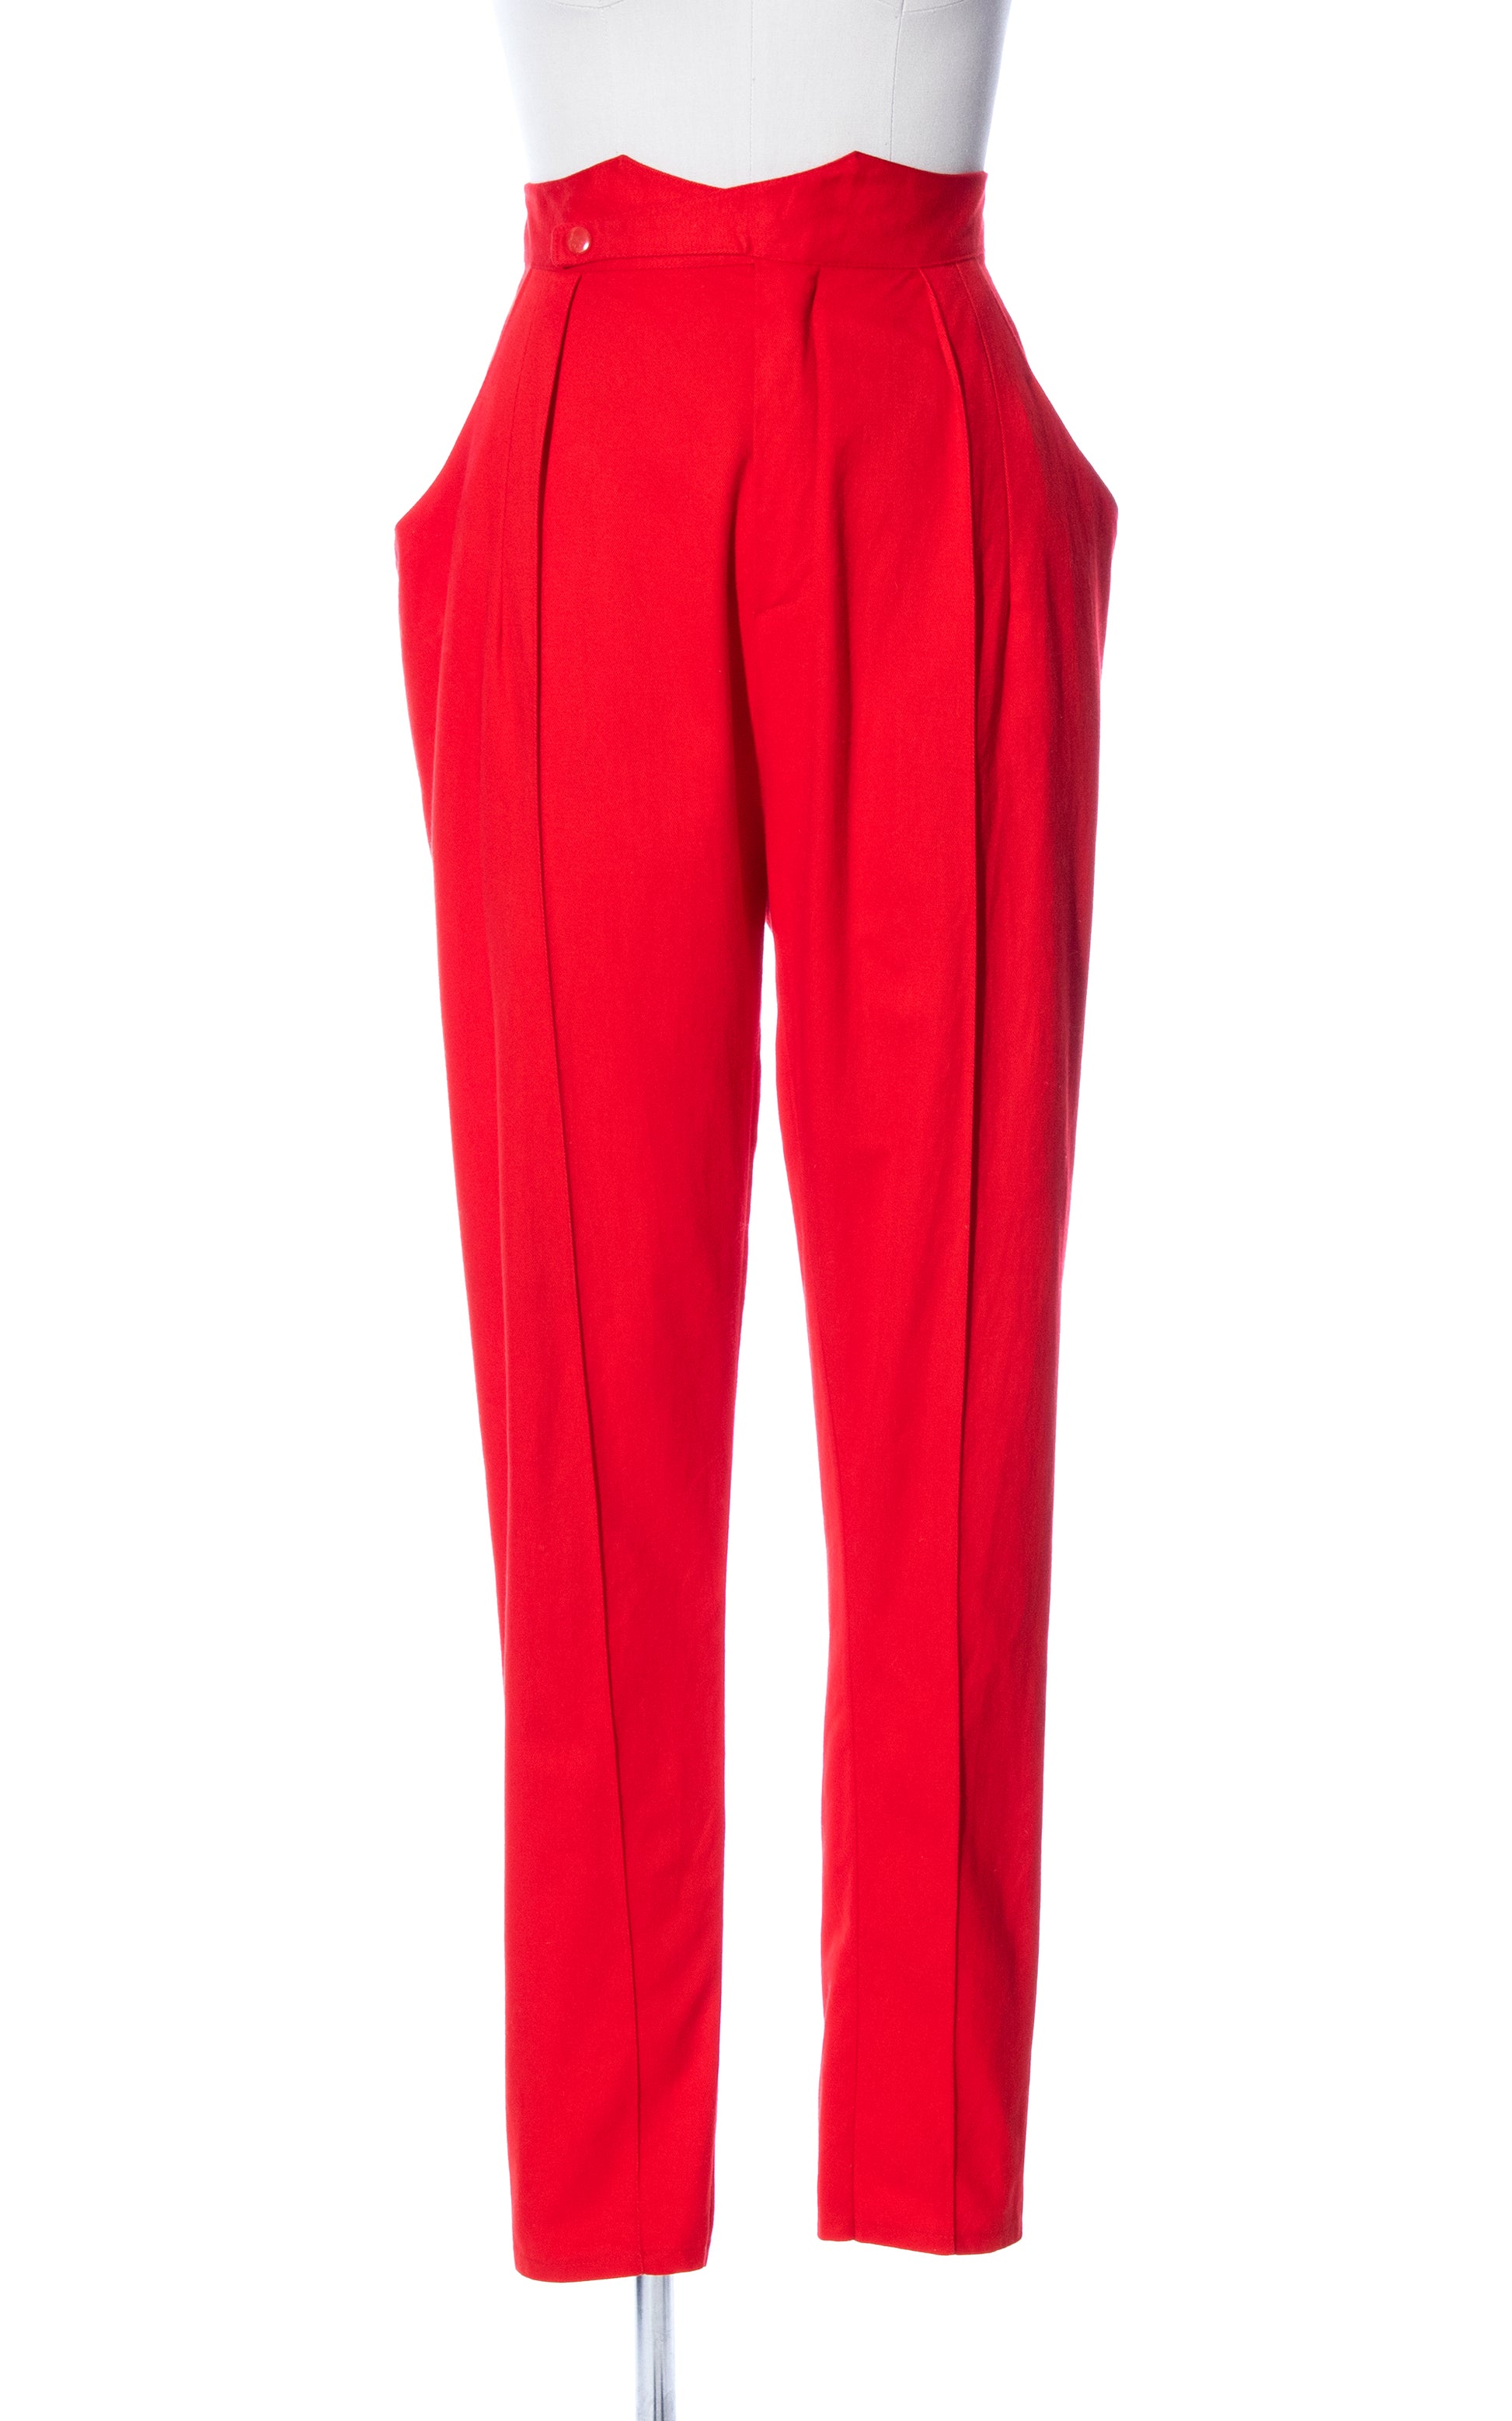 Vintage 80s 1980s Red Cotton Twill Extra High Waisted Pants Birthday Life Vintage